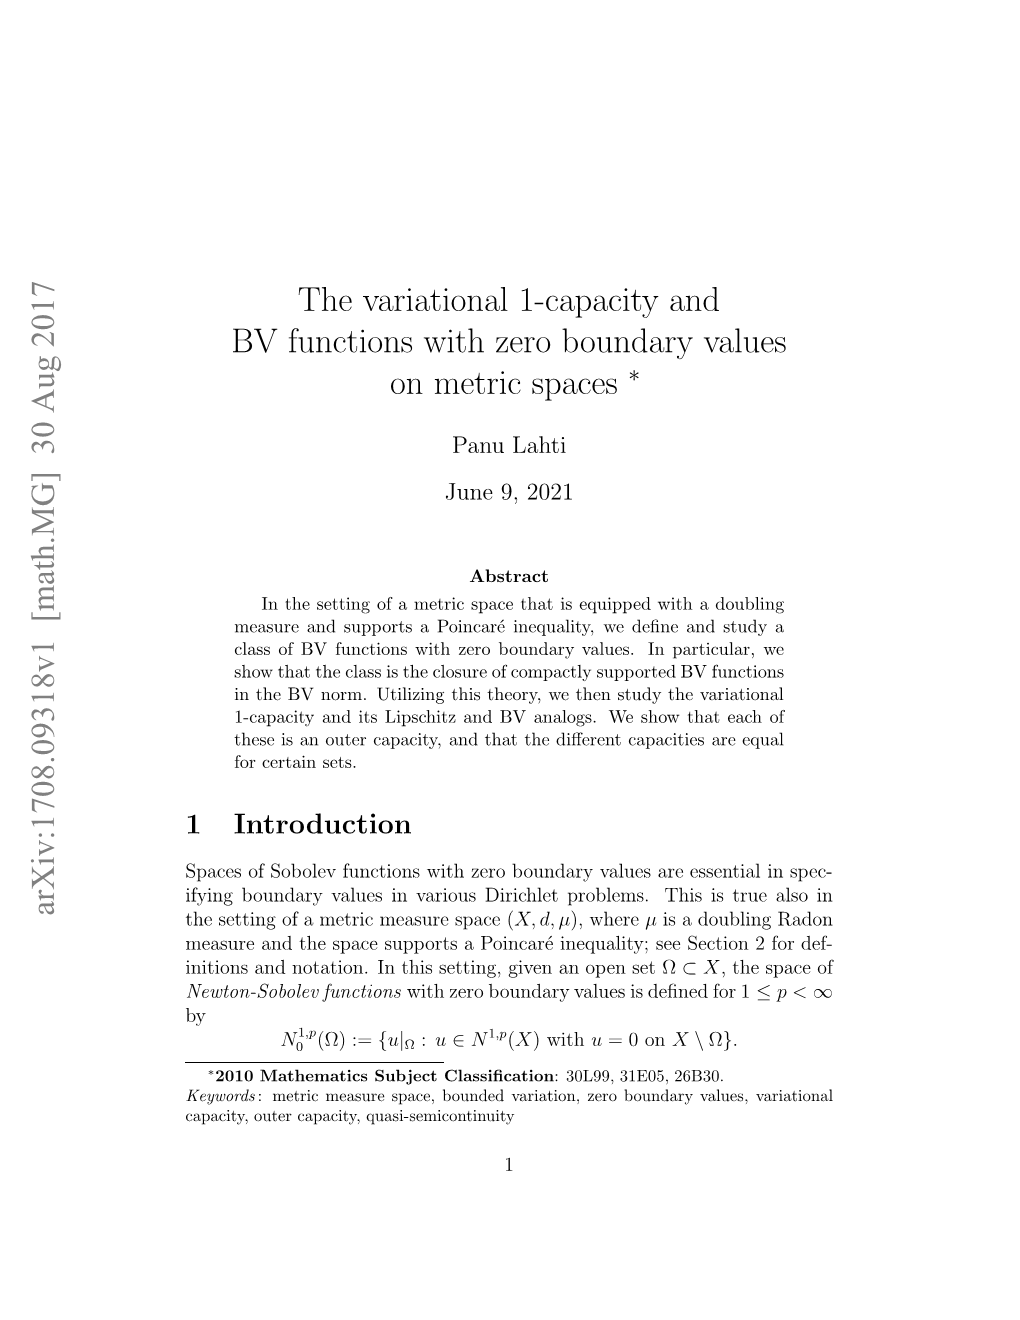 The Variational 1-Capacity and BV Functions with Zero Boundary Values on Metric Spaces